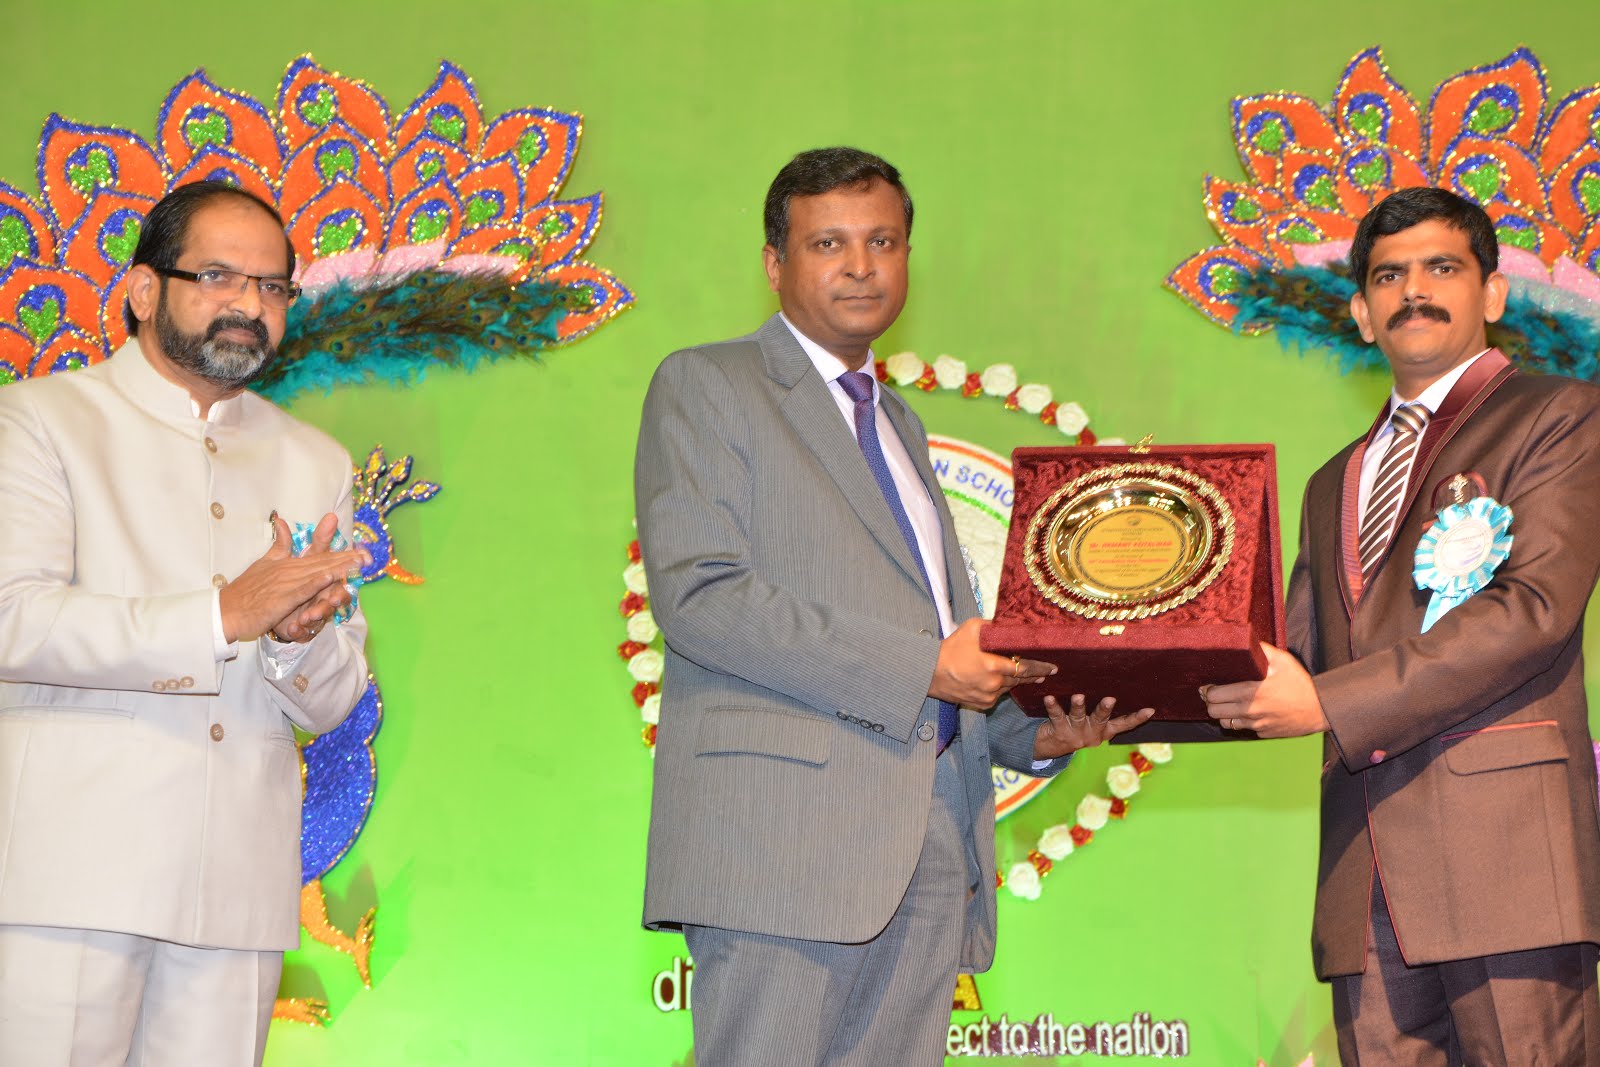 Dr J Francis Borgio felicitates His Excellency the Indian Deputy Chief of Mission at IISD